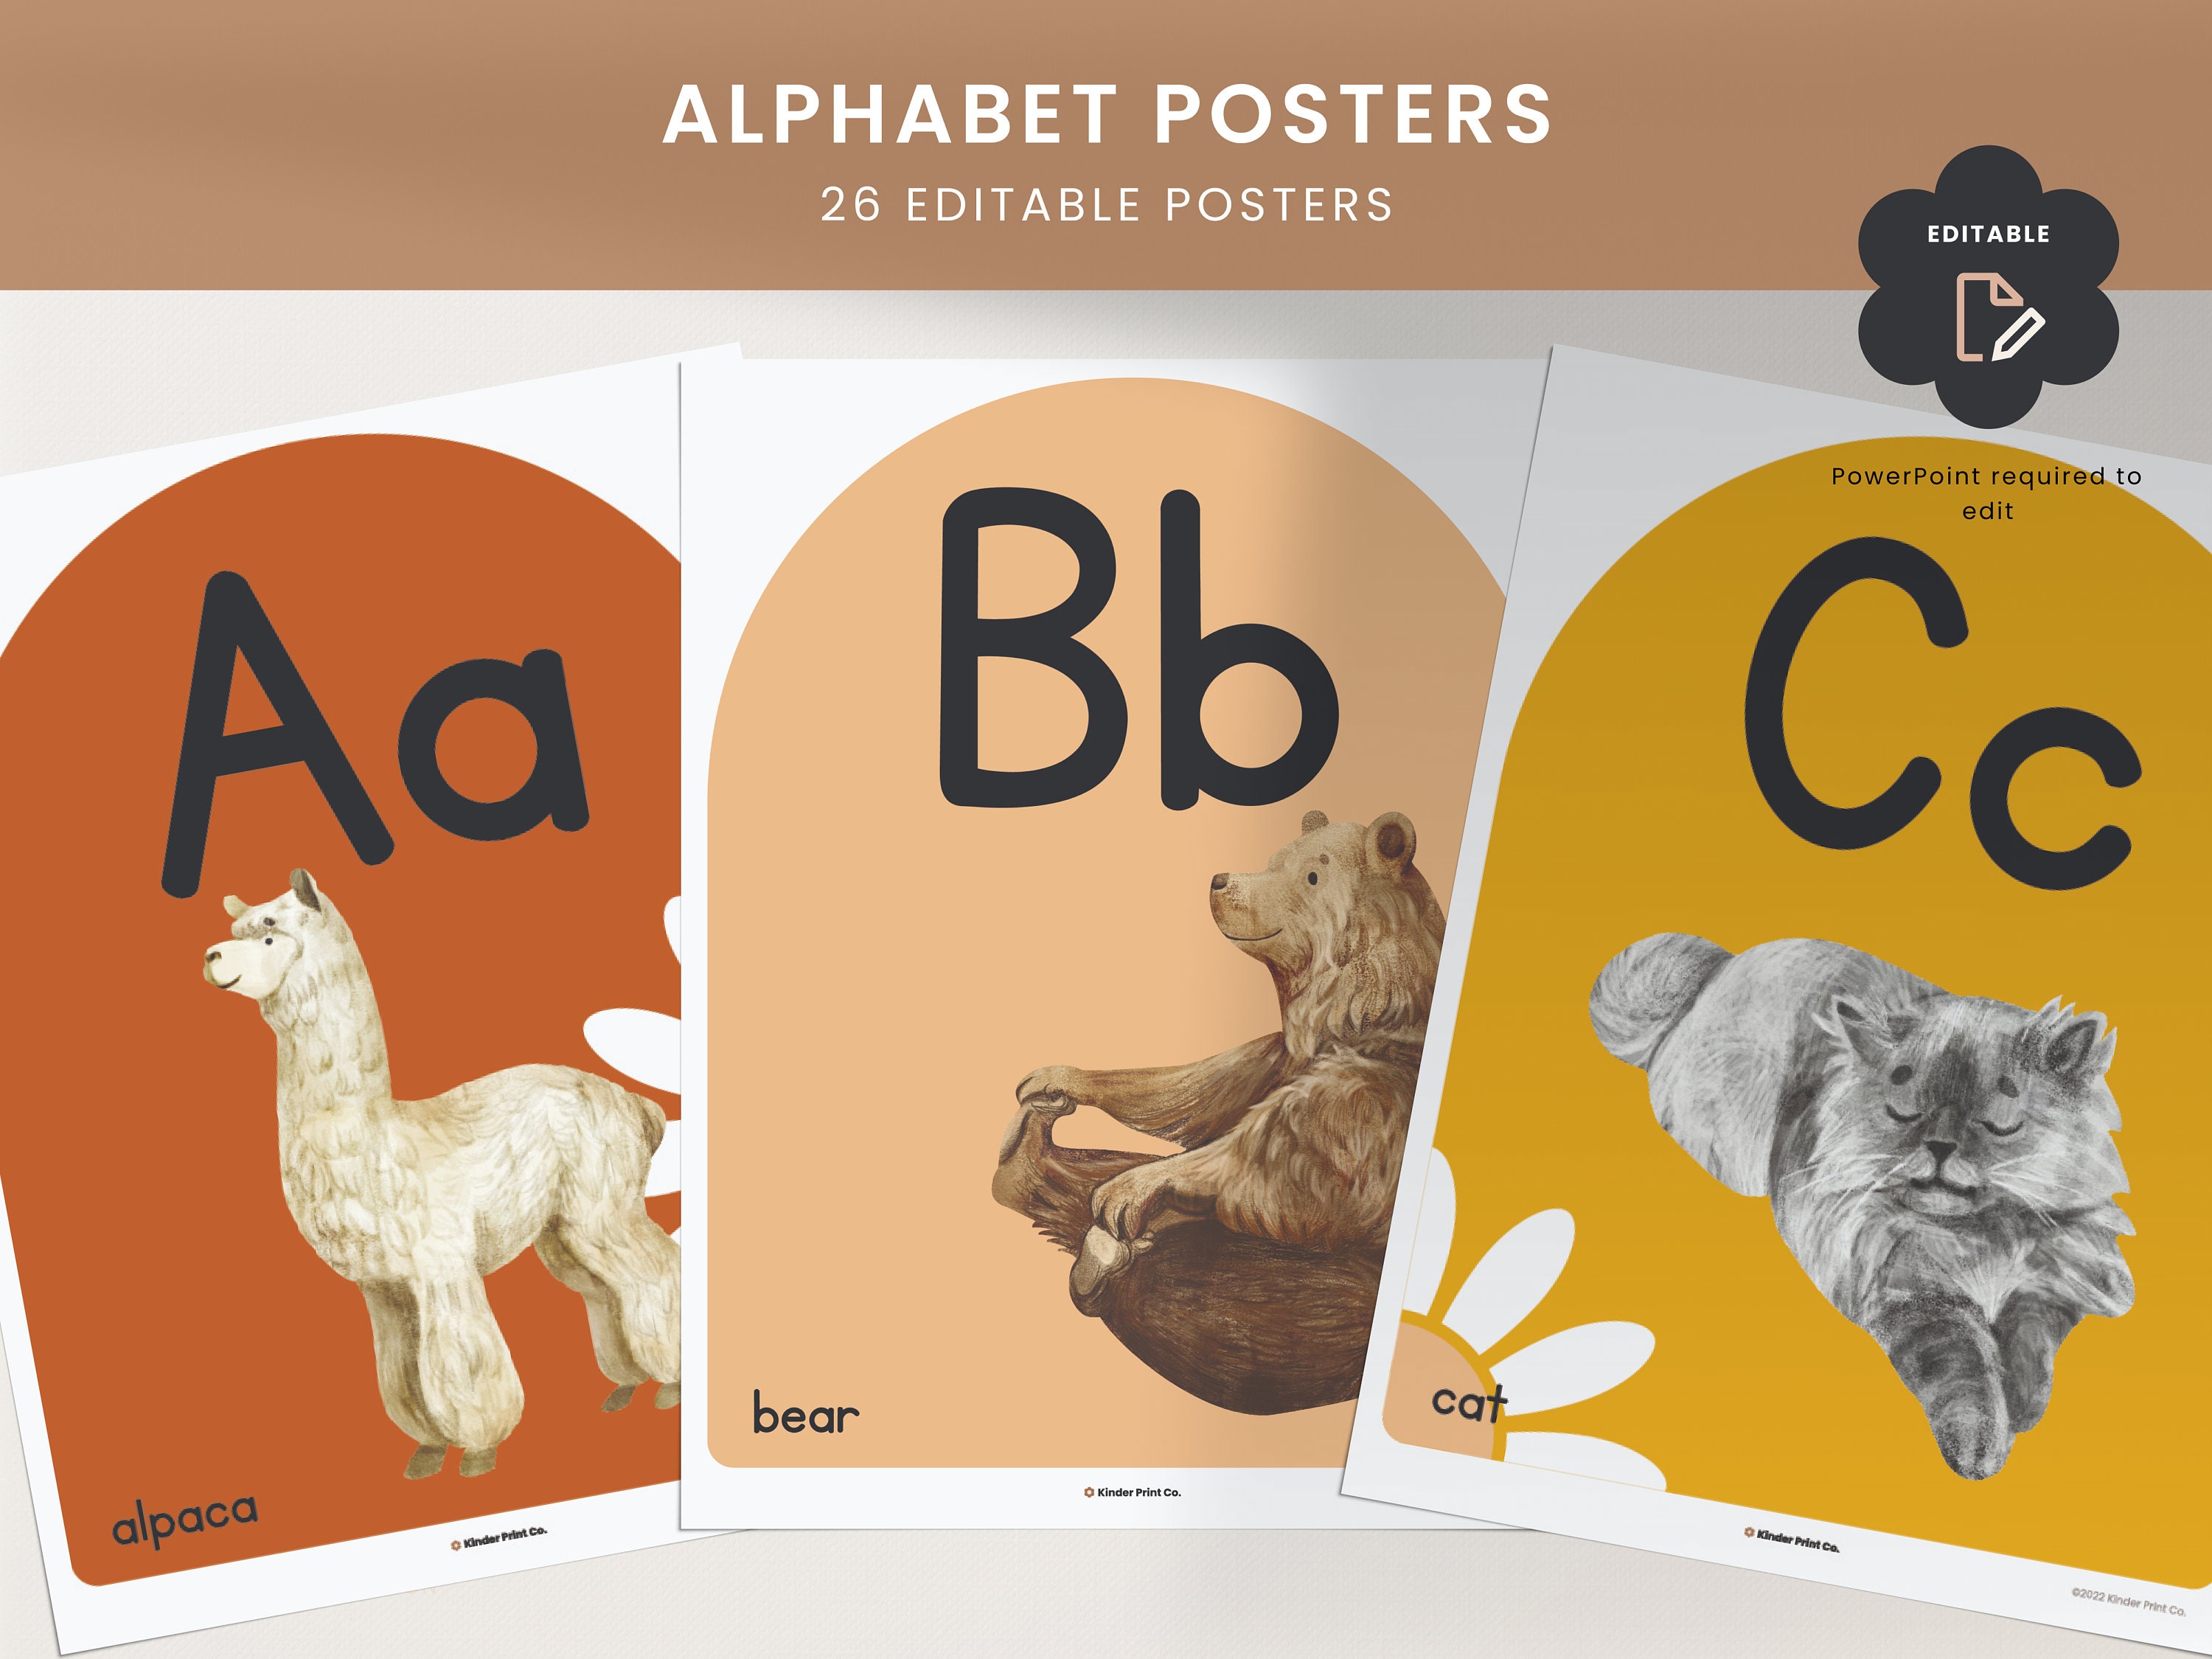 The Alphabet Grand Prix Poster - Letters and Animals